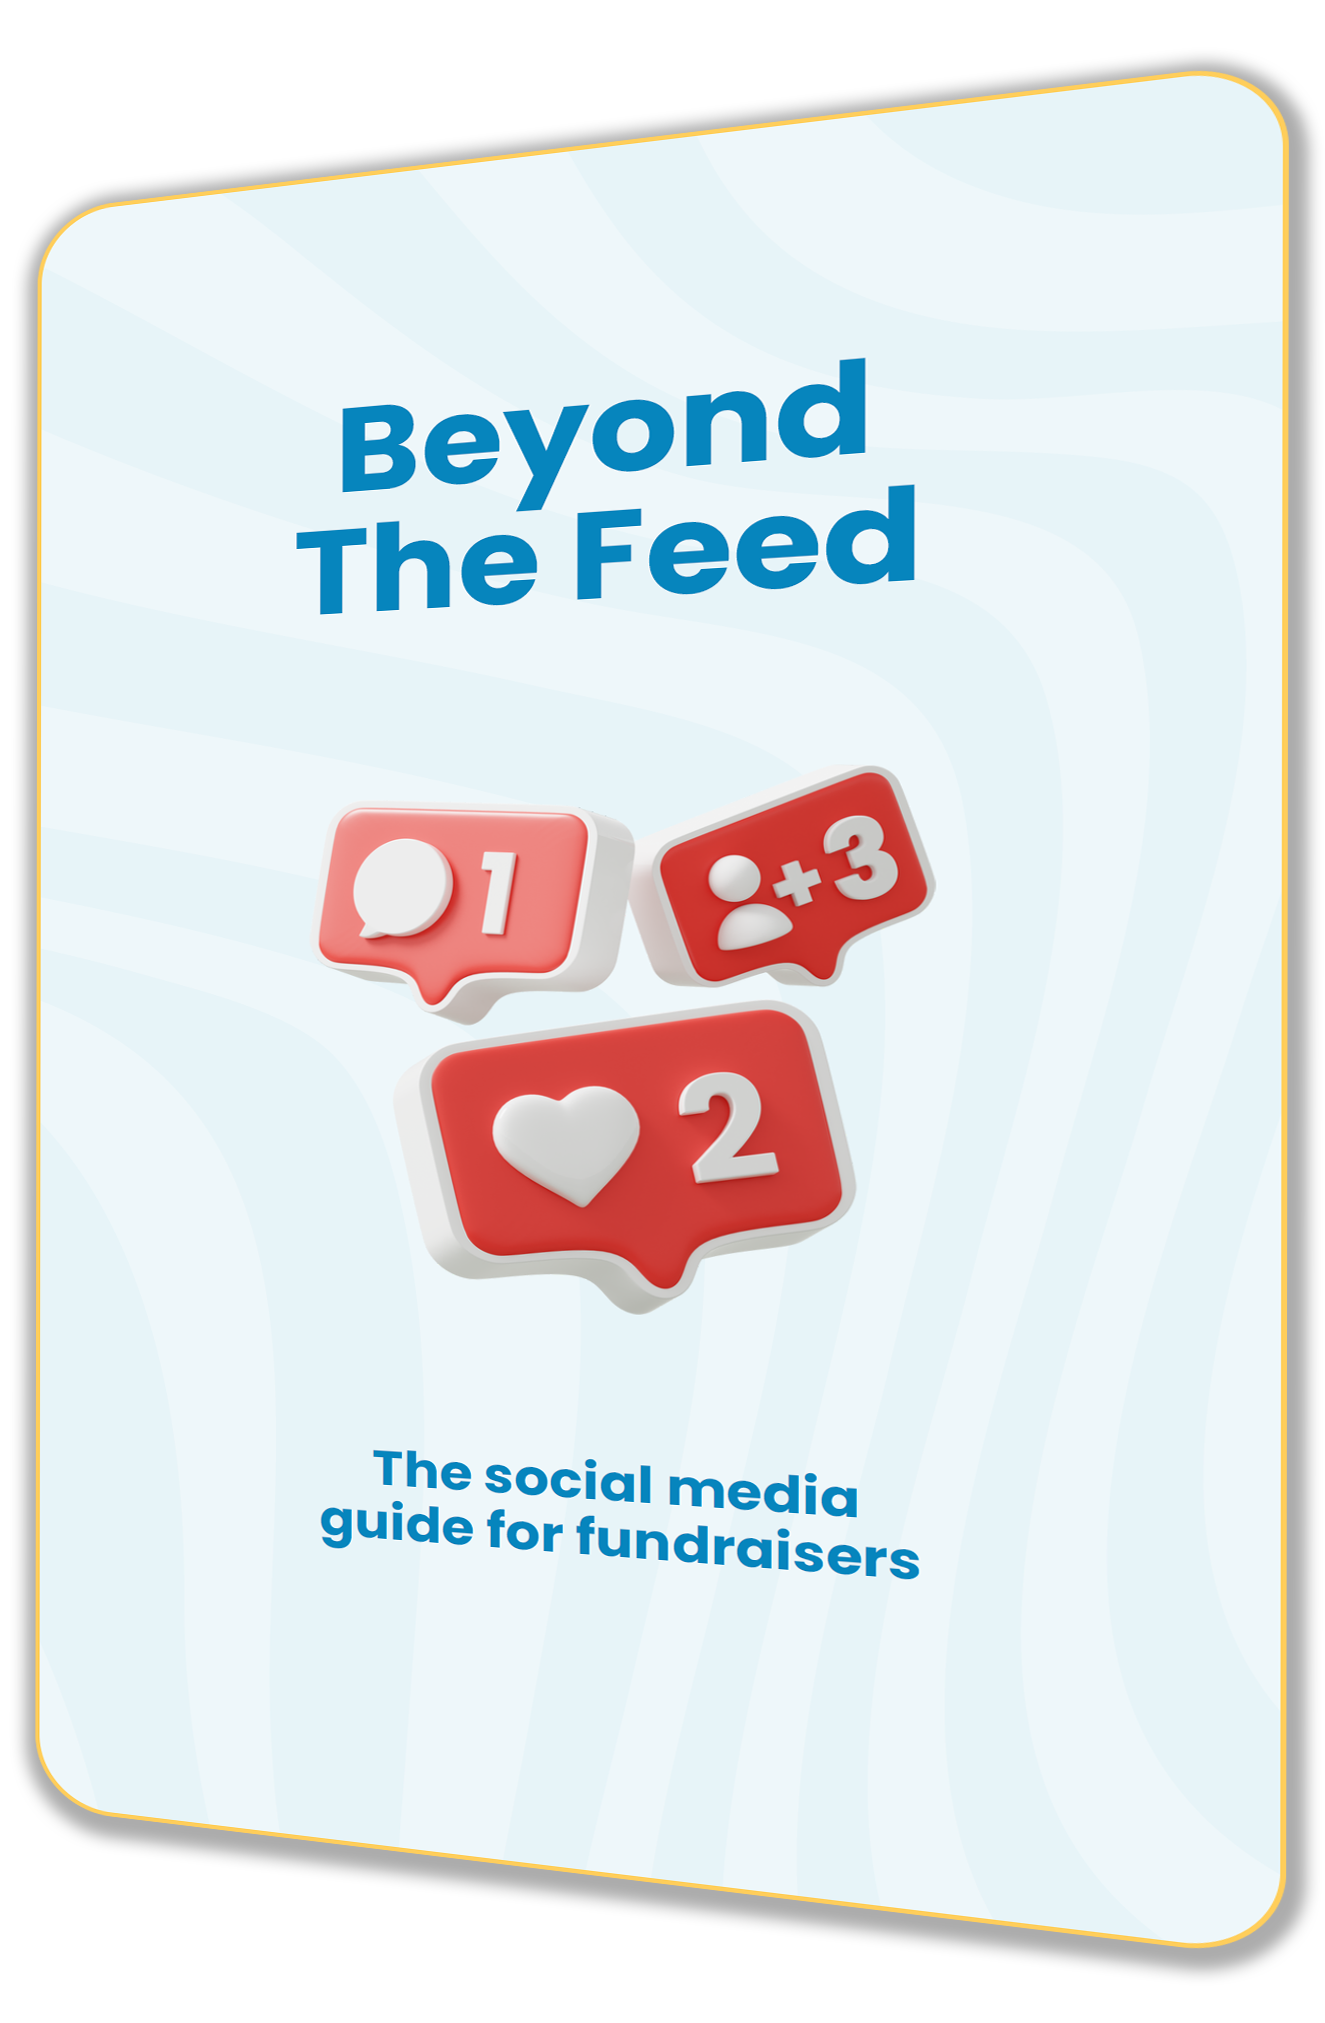 Beyond the Feed – The social media guide for fundraisers